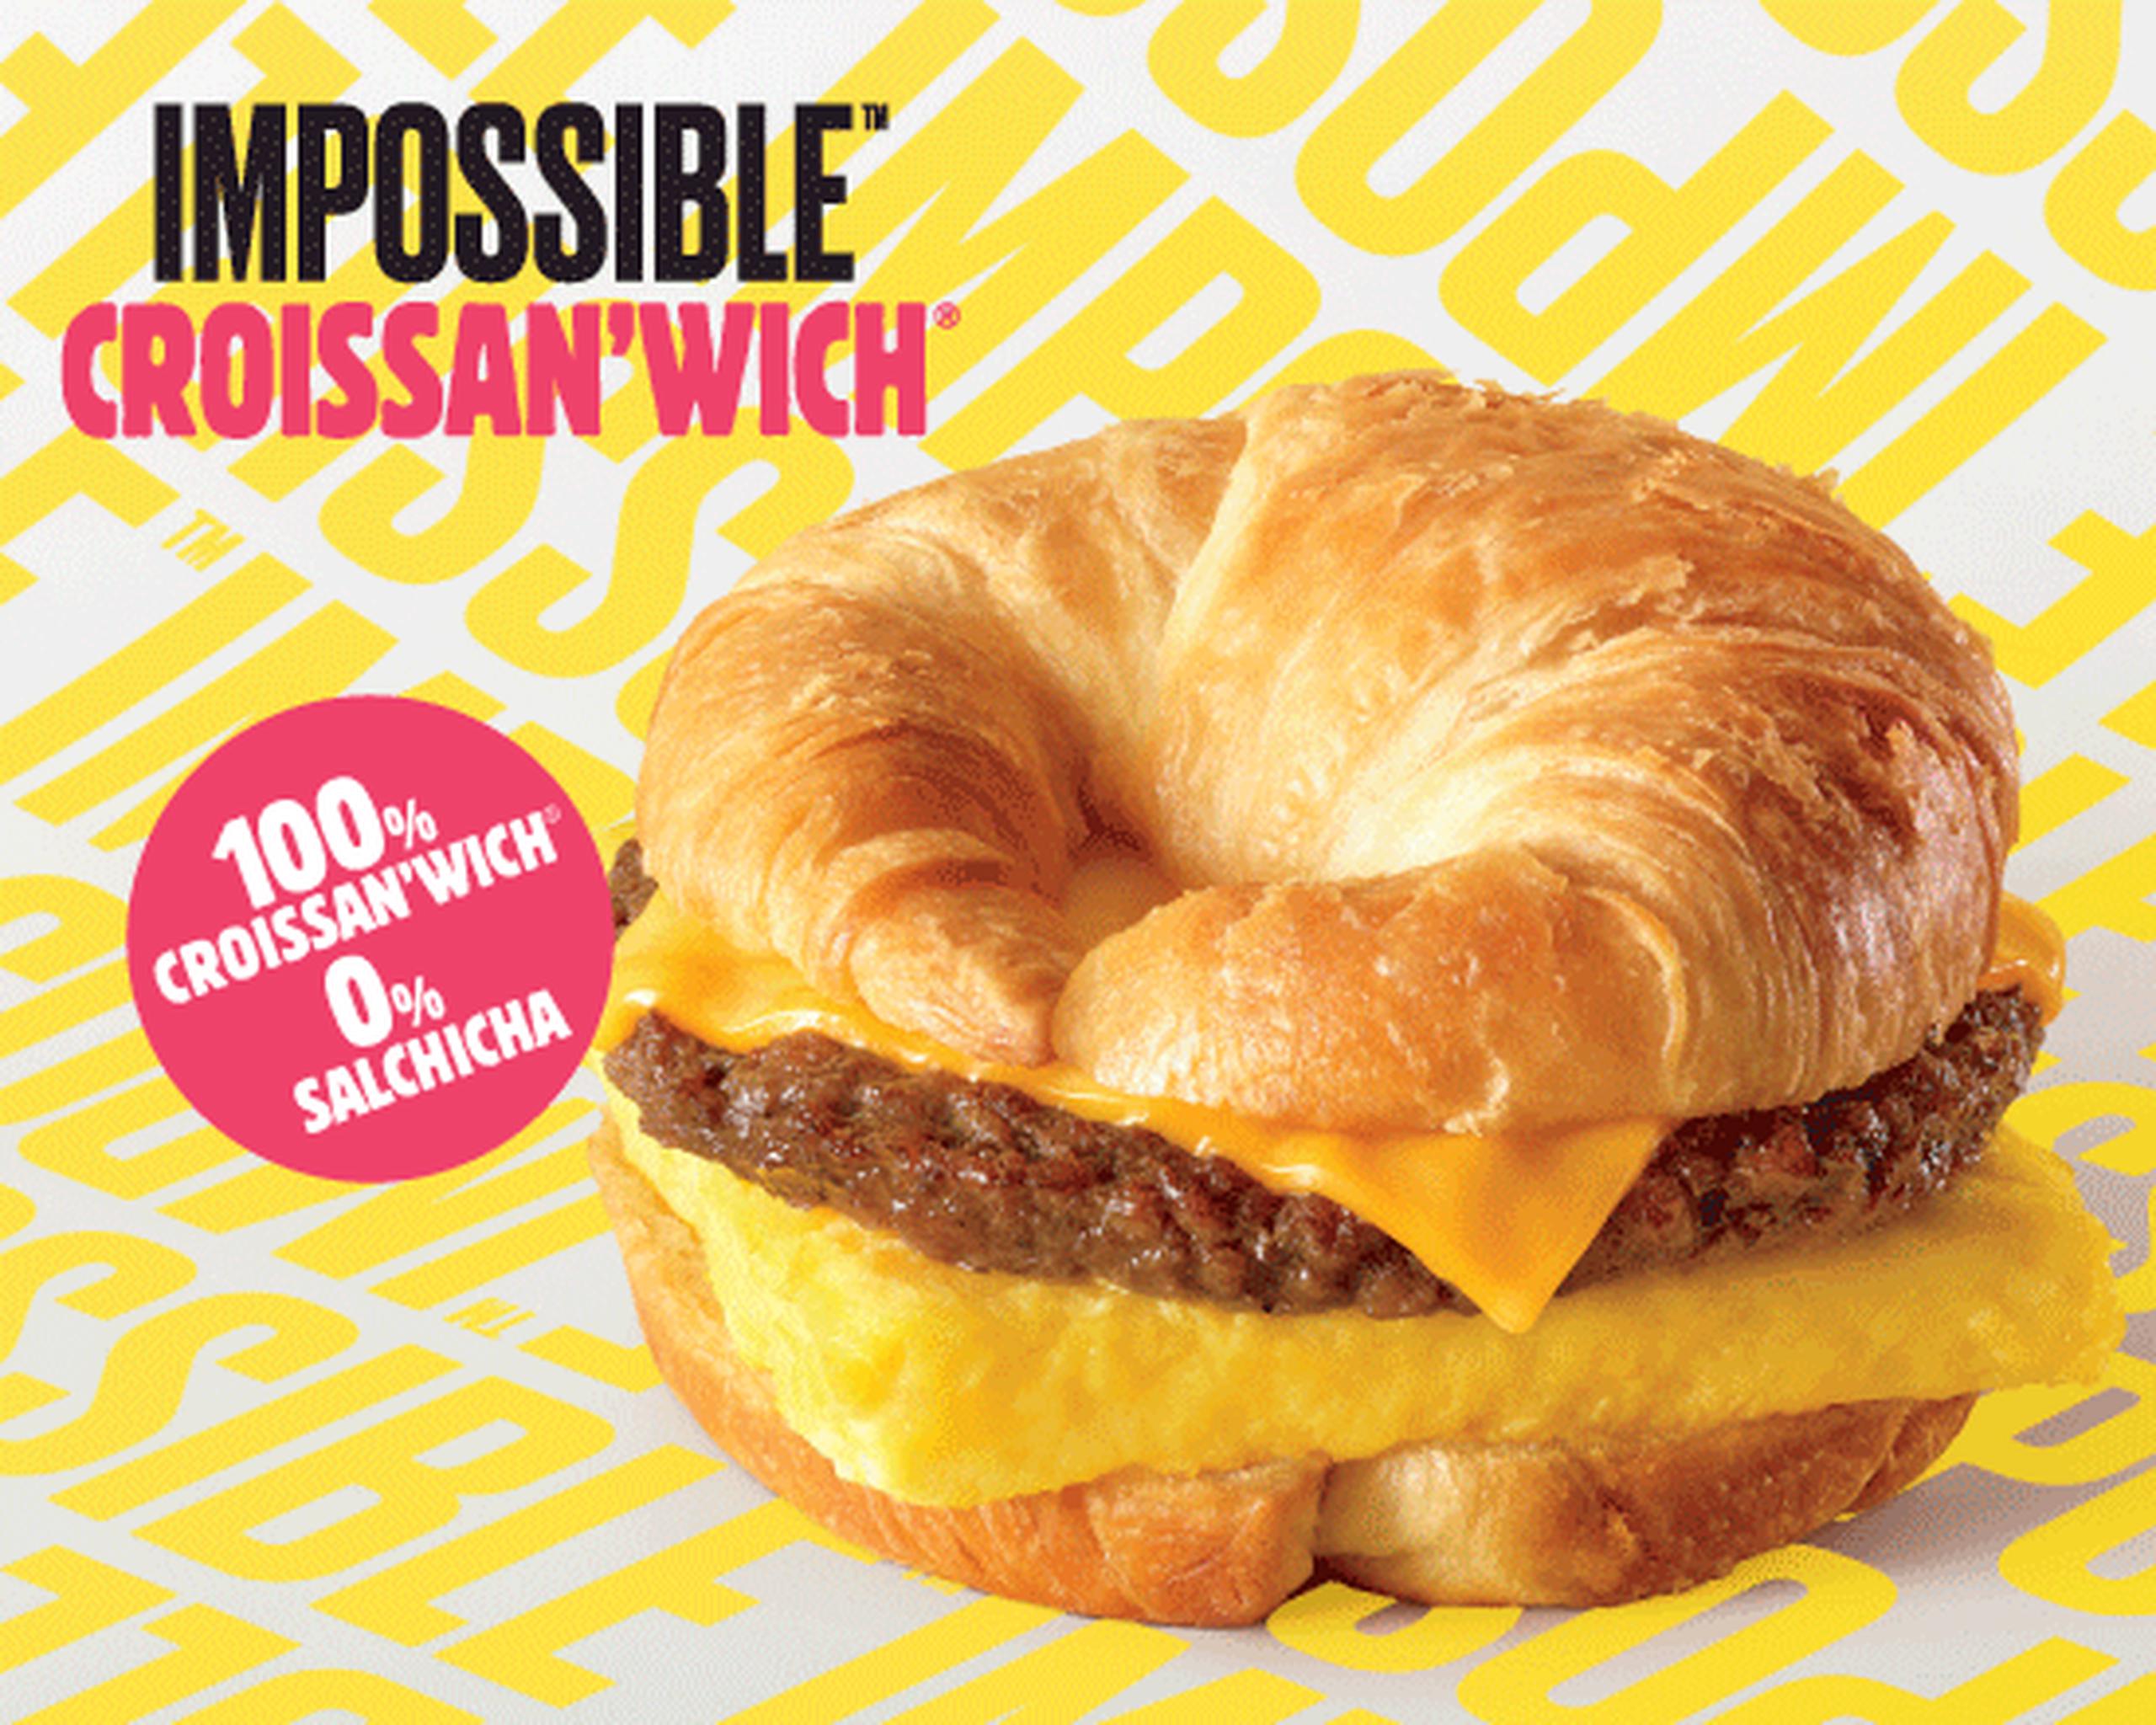 Impossible Croissan’wich